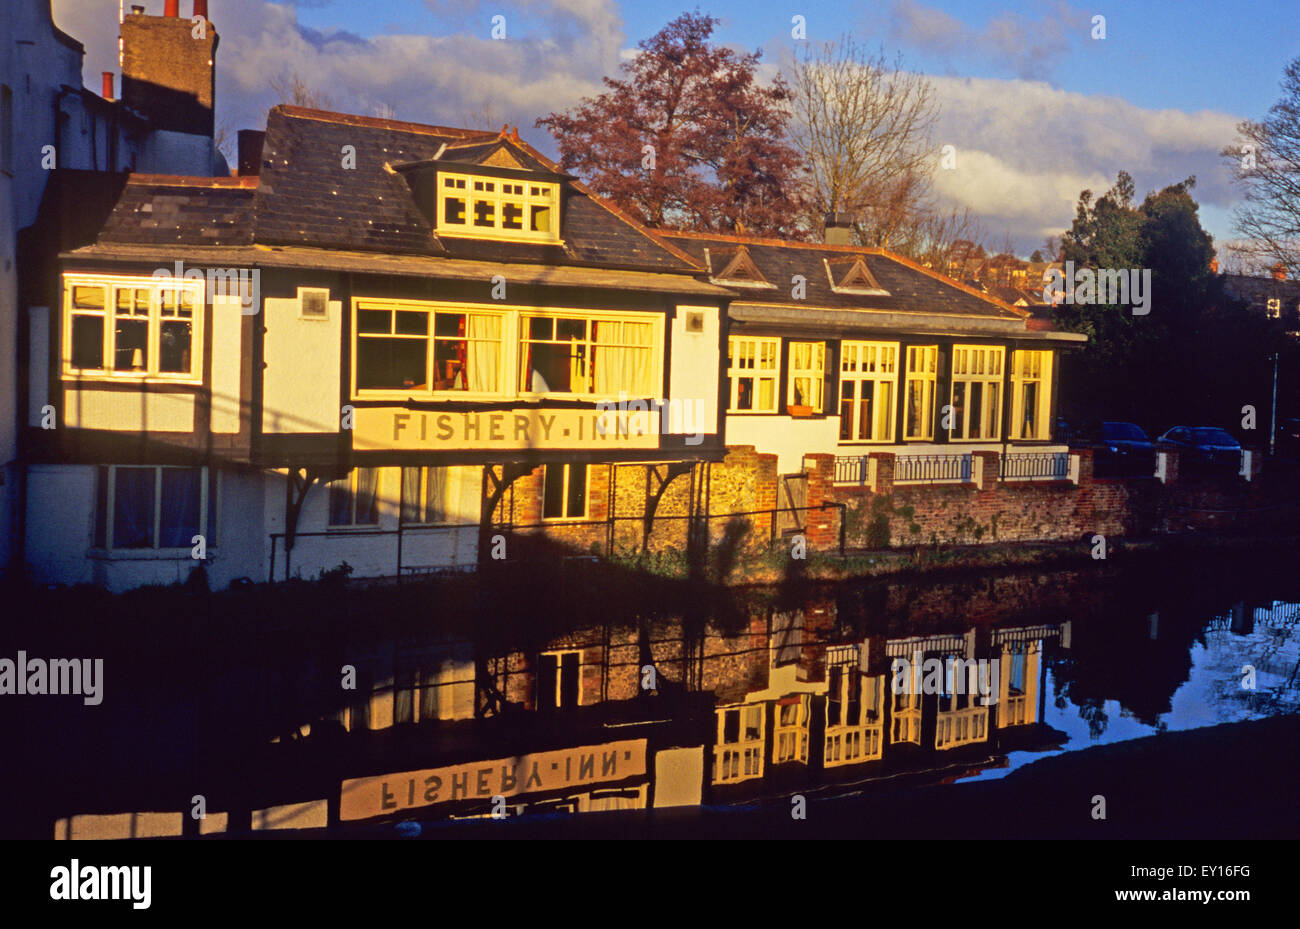 Picture of the Fishery Inn, pub/restaurant on the Grand Union Canal, at Hemel - Hempstead in Hertfordshire UK. Stock Photo